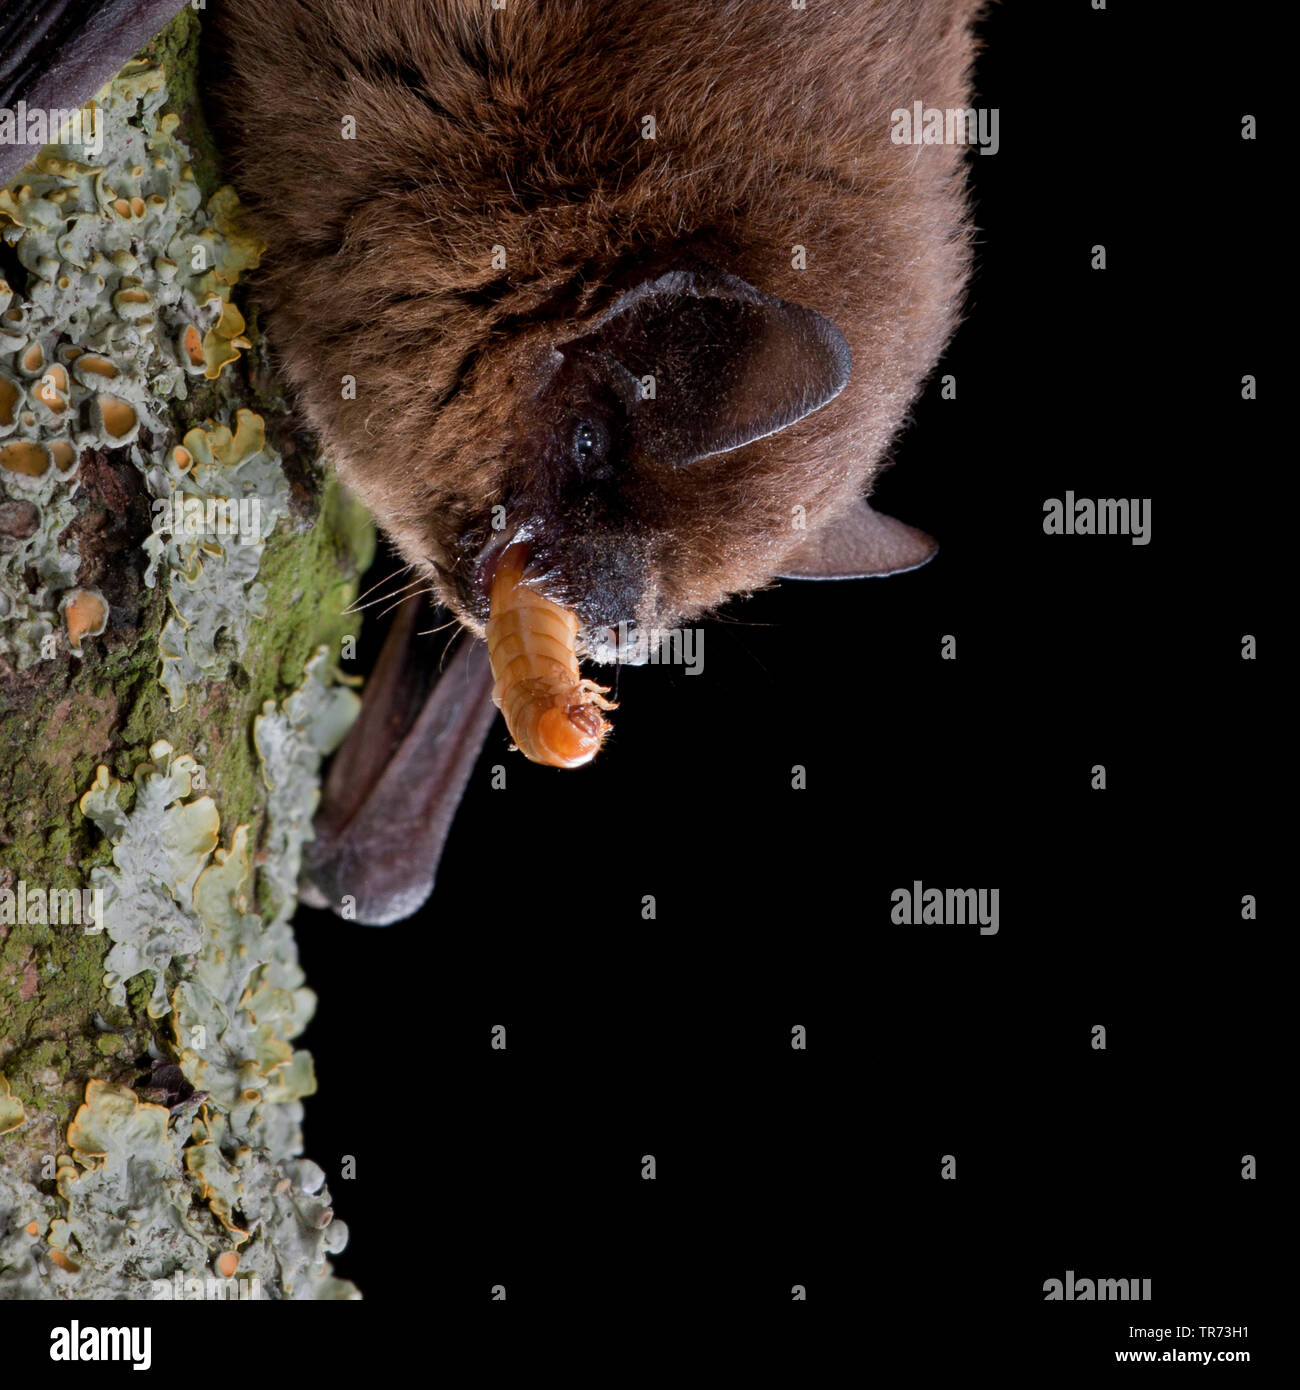 common pipistrelle (Pipistrellus pipistrellus), hanging headlong with prey in the mouth at a lichened tree trunk, Netherlands Stock Photo